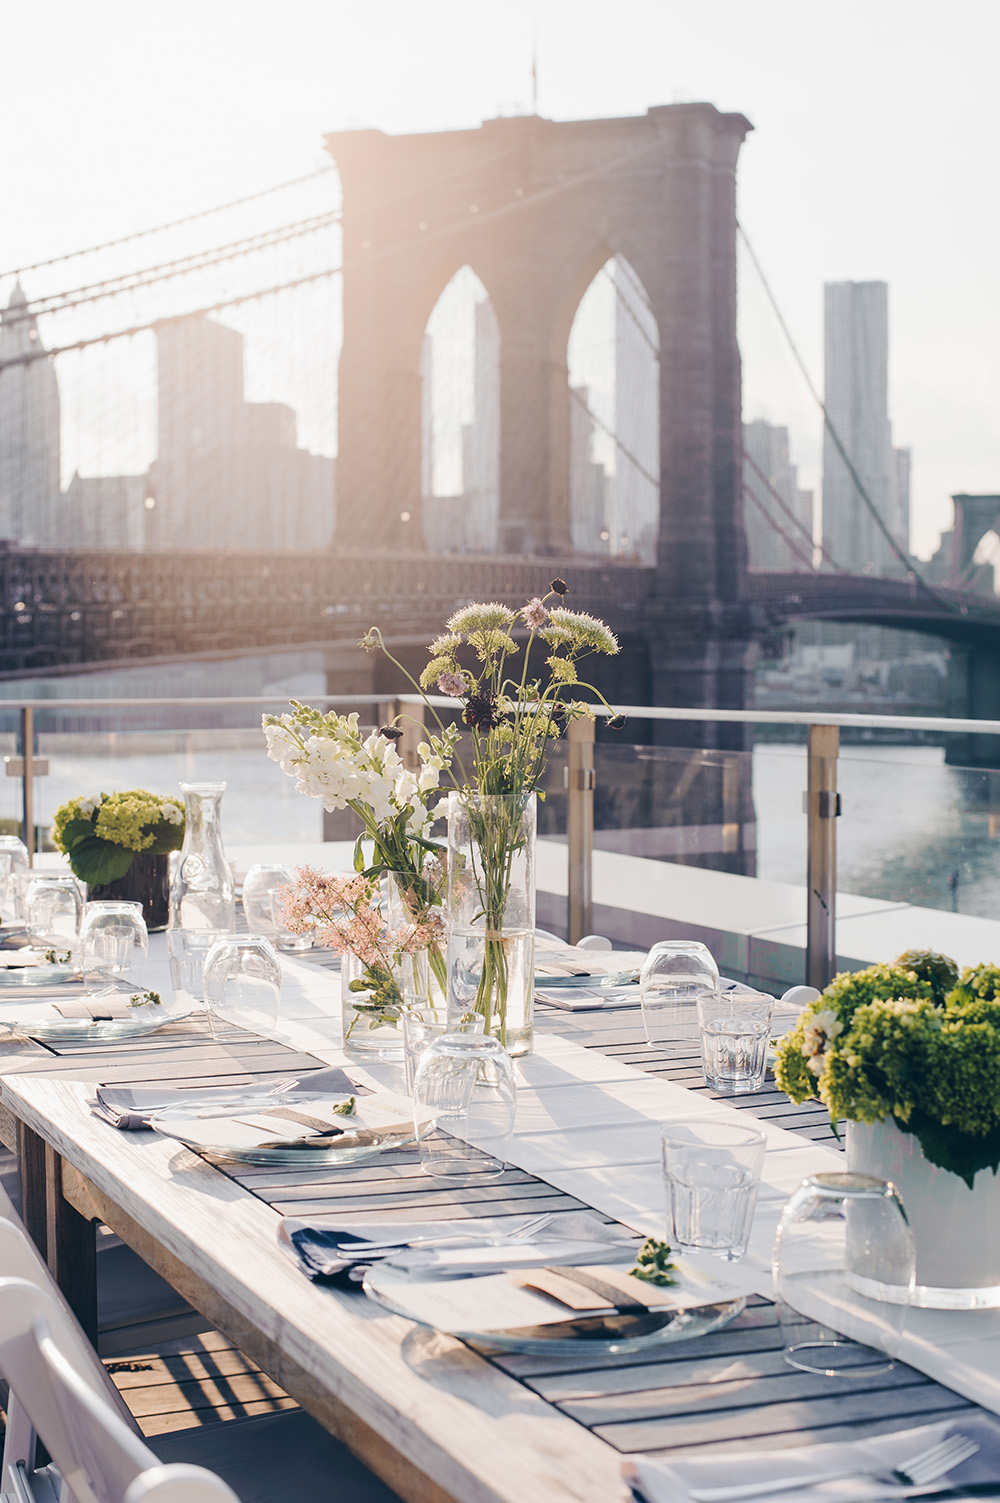 Beautifully set rooftop dinner table at sunset with the Brooklyn Bridge in the background